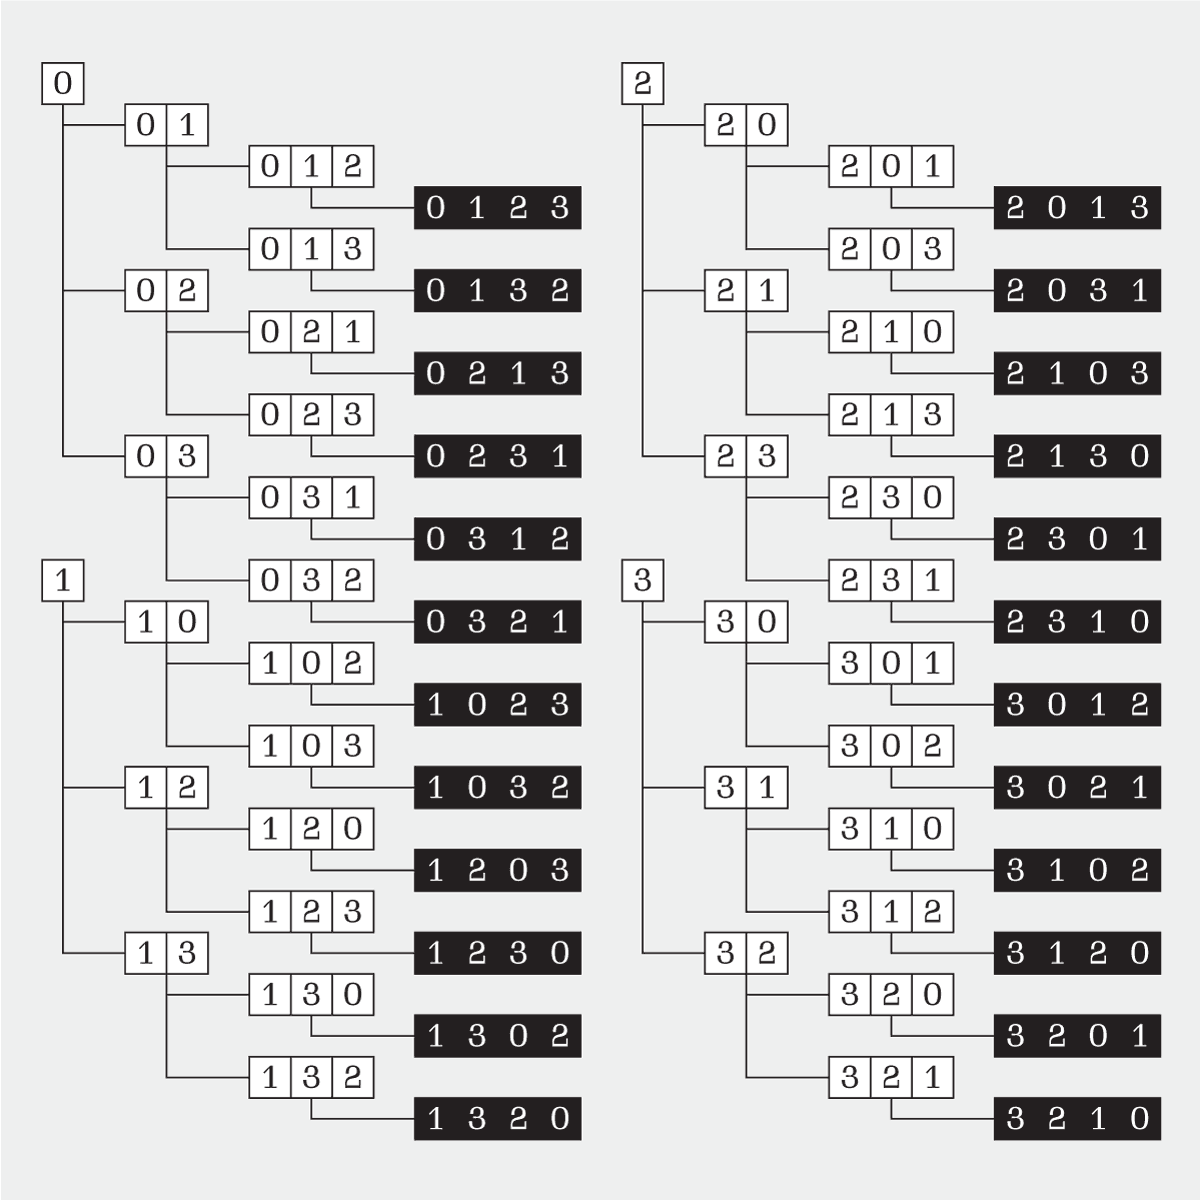 A diagram showing possible sequences of numbers from zero to three. On the left, the number 0 is shown with lines extending to three possible two-digit sequences that could follow from it: 0-1, 0-2, 0-3. From each two-digit sequence are lines extending to two possible three-digit sequences. For example, extended from the 0-1 sequence are 0-1-2 and 0-1-3. From each three-digit sequence is a line extending to a four-digit sequence. For example, extended from 0-1-2 is 0-1-2-3. The process is repeated for each digit from zero to three, totalling 64 sequences. There are 24 four-digit sequences, which are highlighted.